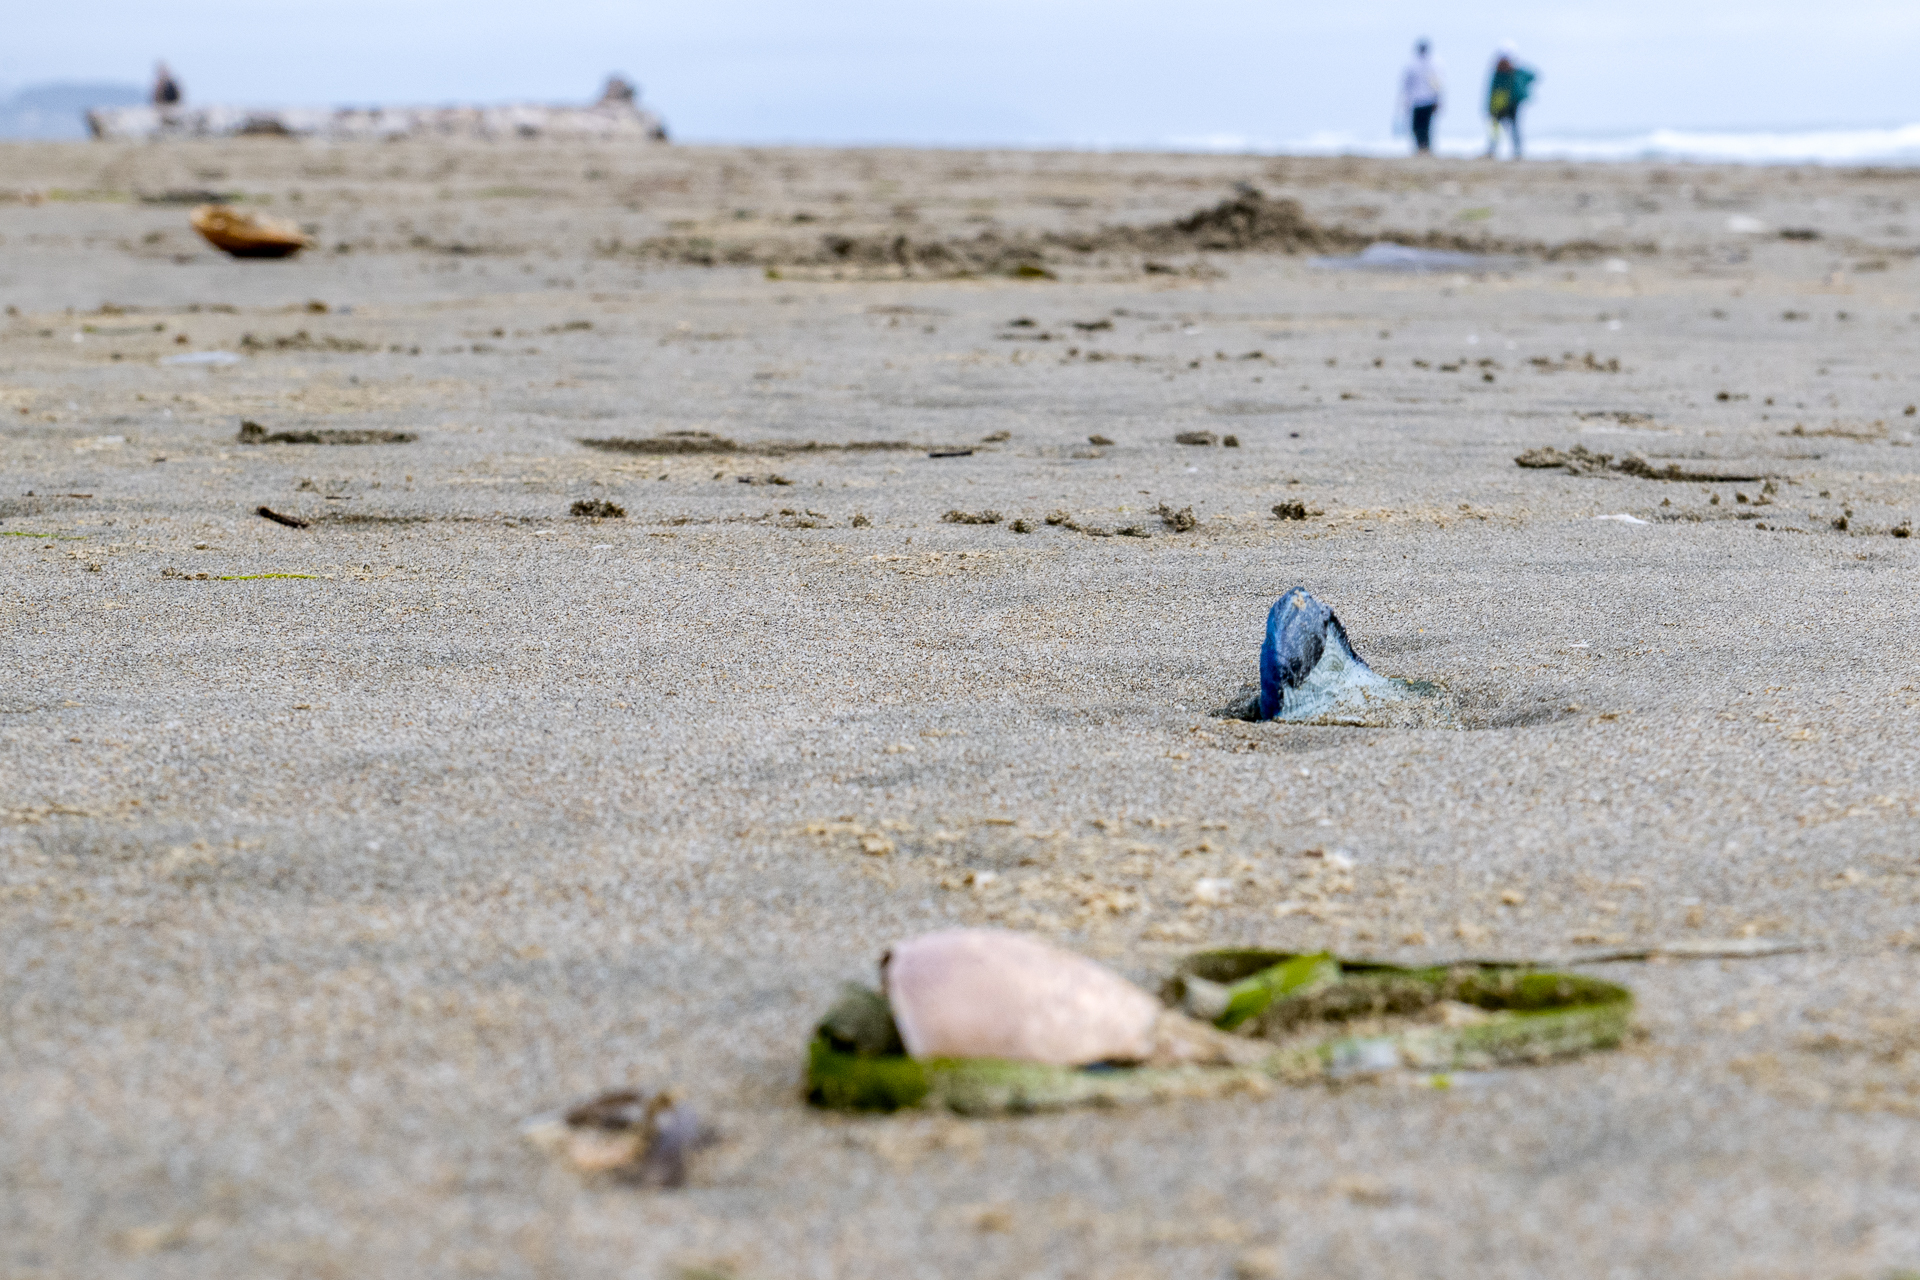 A shot of a sandy beach with scattered seaweed and shells. Nearby, a blue, translucent organism similar to a jellyfish rests on the sand. Two people in the distance walk along the ocean.